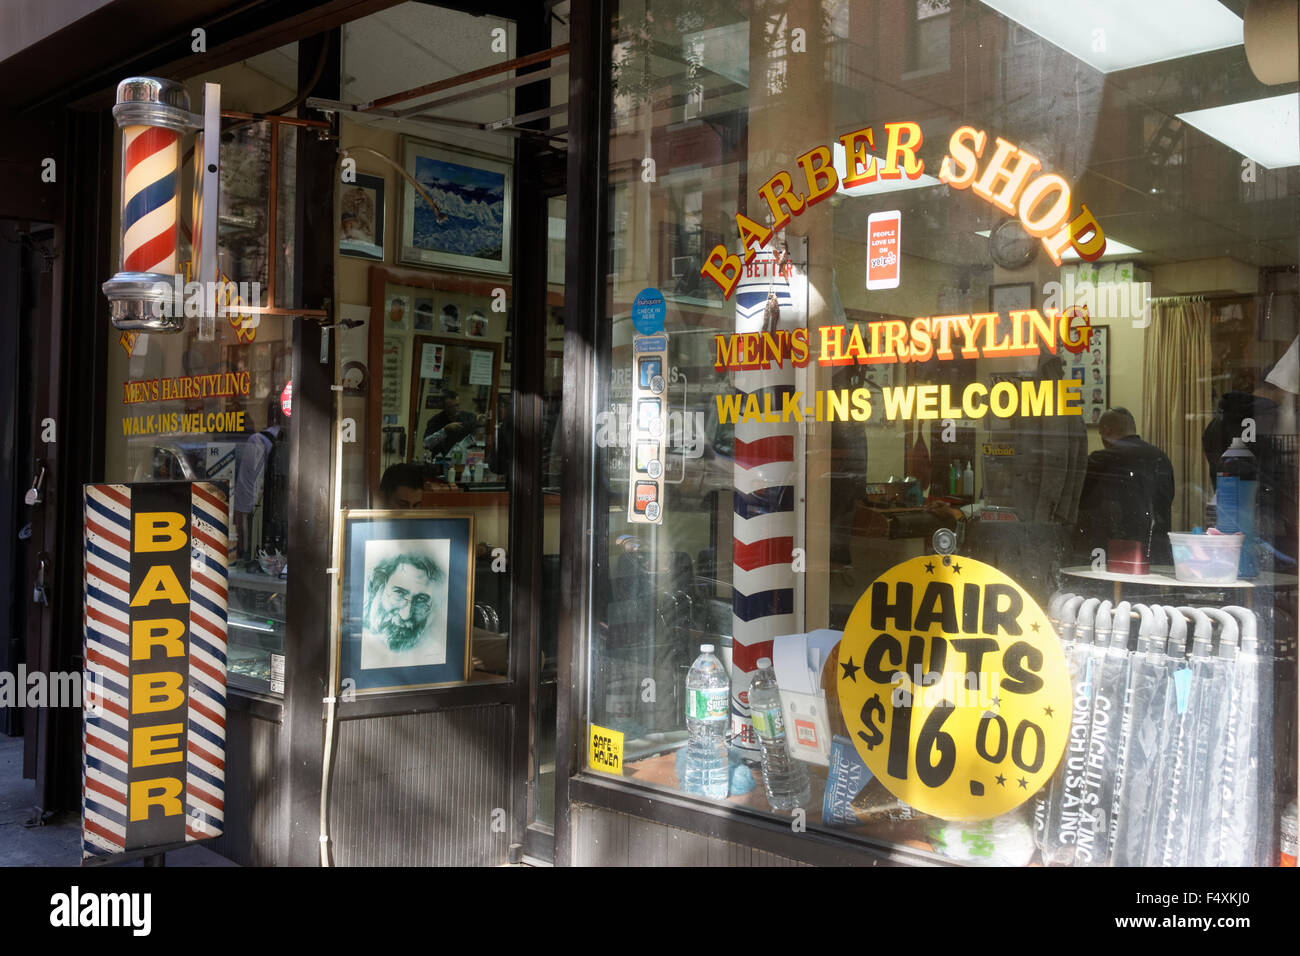 David S An Old Fashioned Barber Shop On Manhattan S Upper